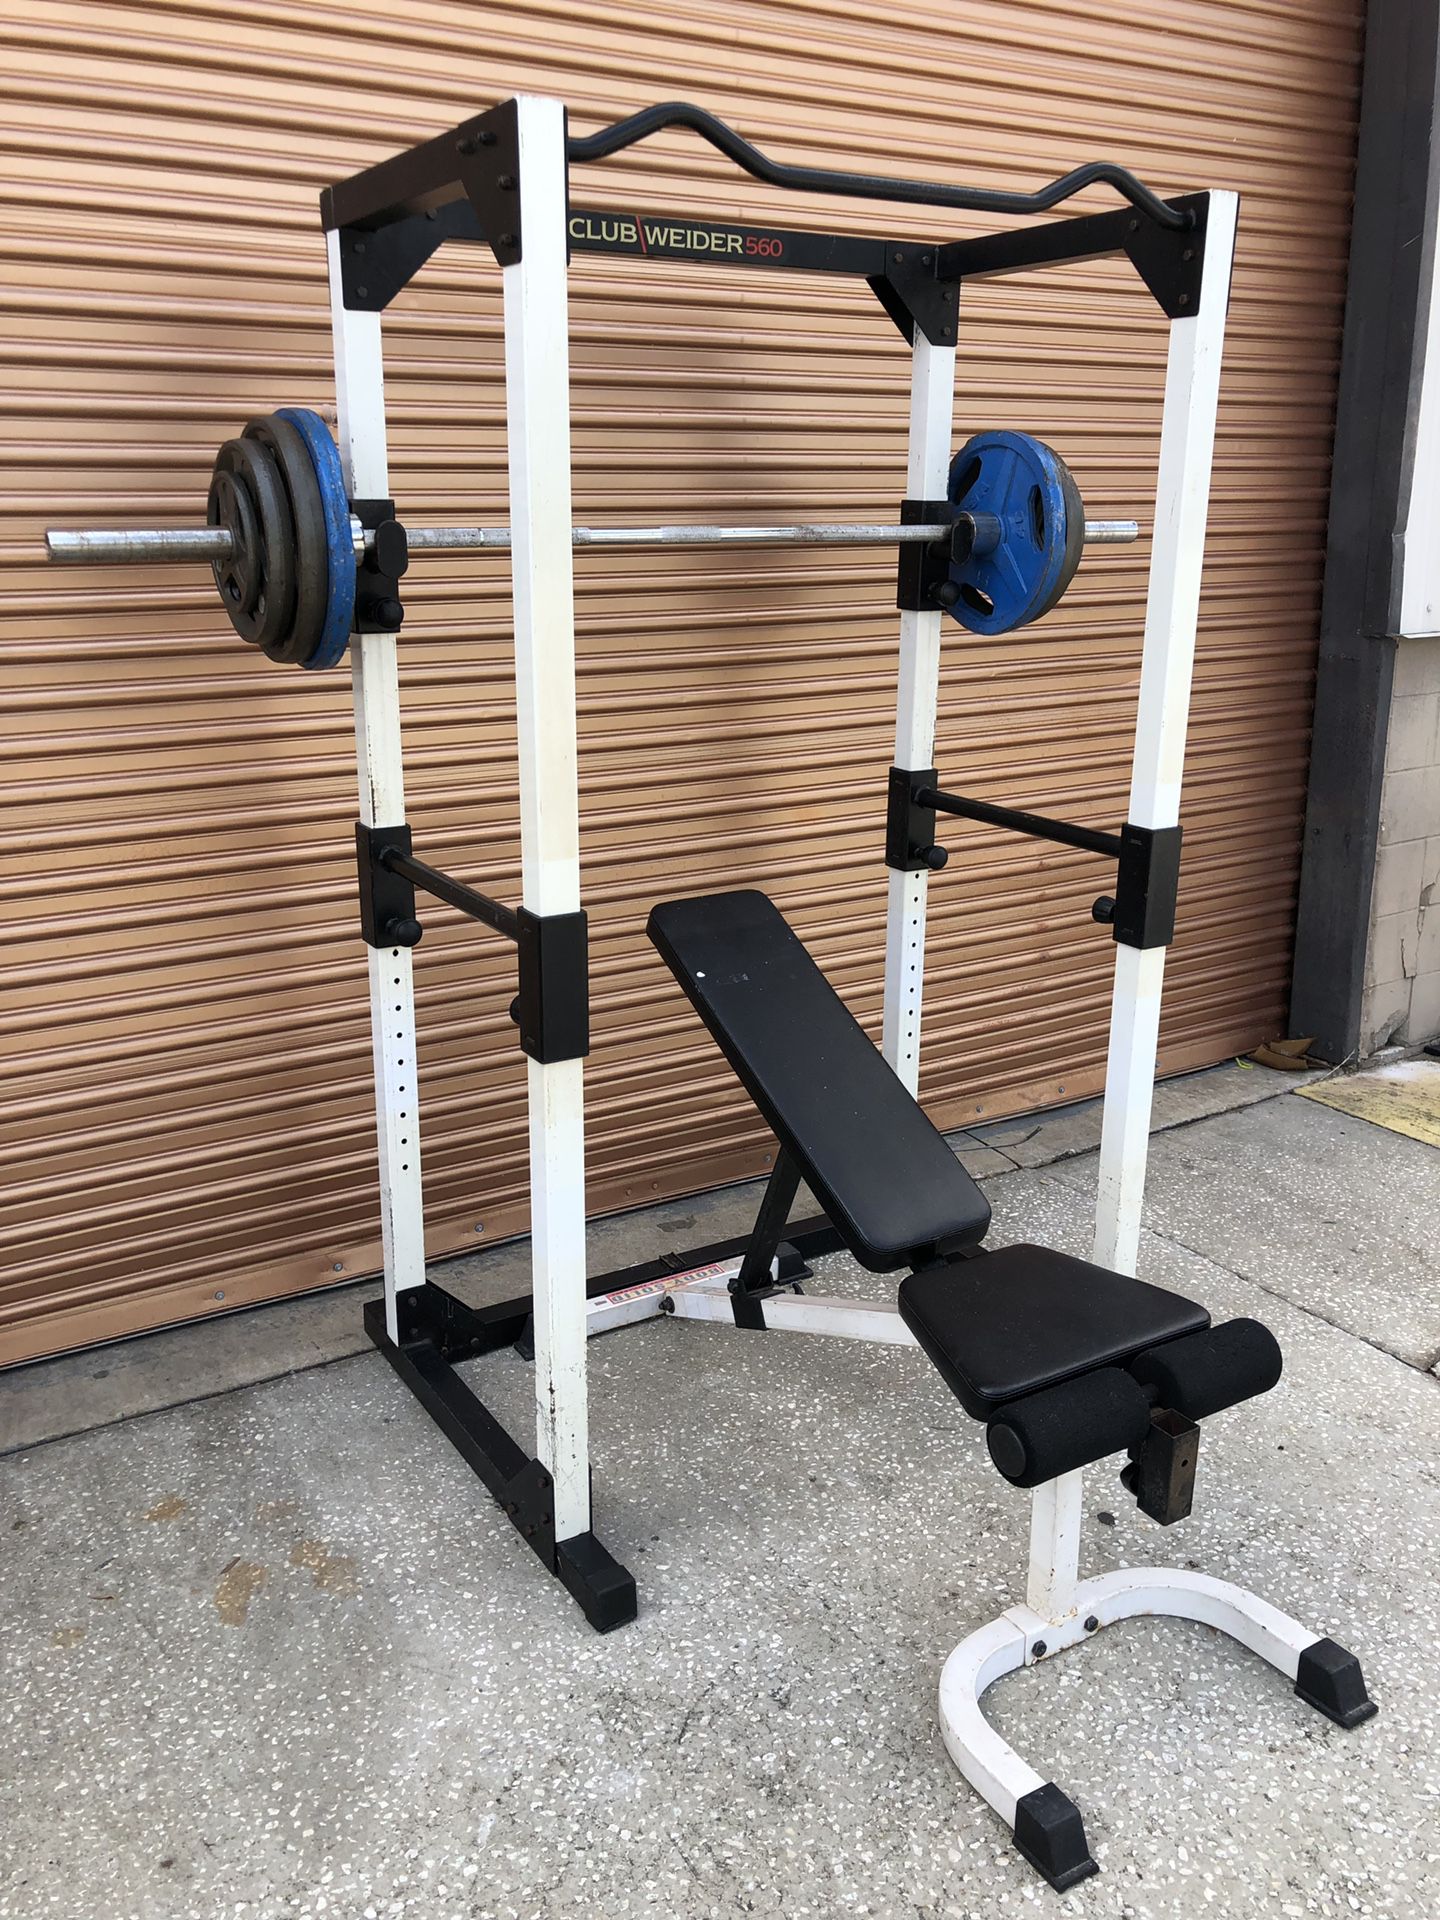 Full Squat / Power Rack w/ Adjustable Bench, 265 Lb Olympic Weight Set Complete Home Gym